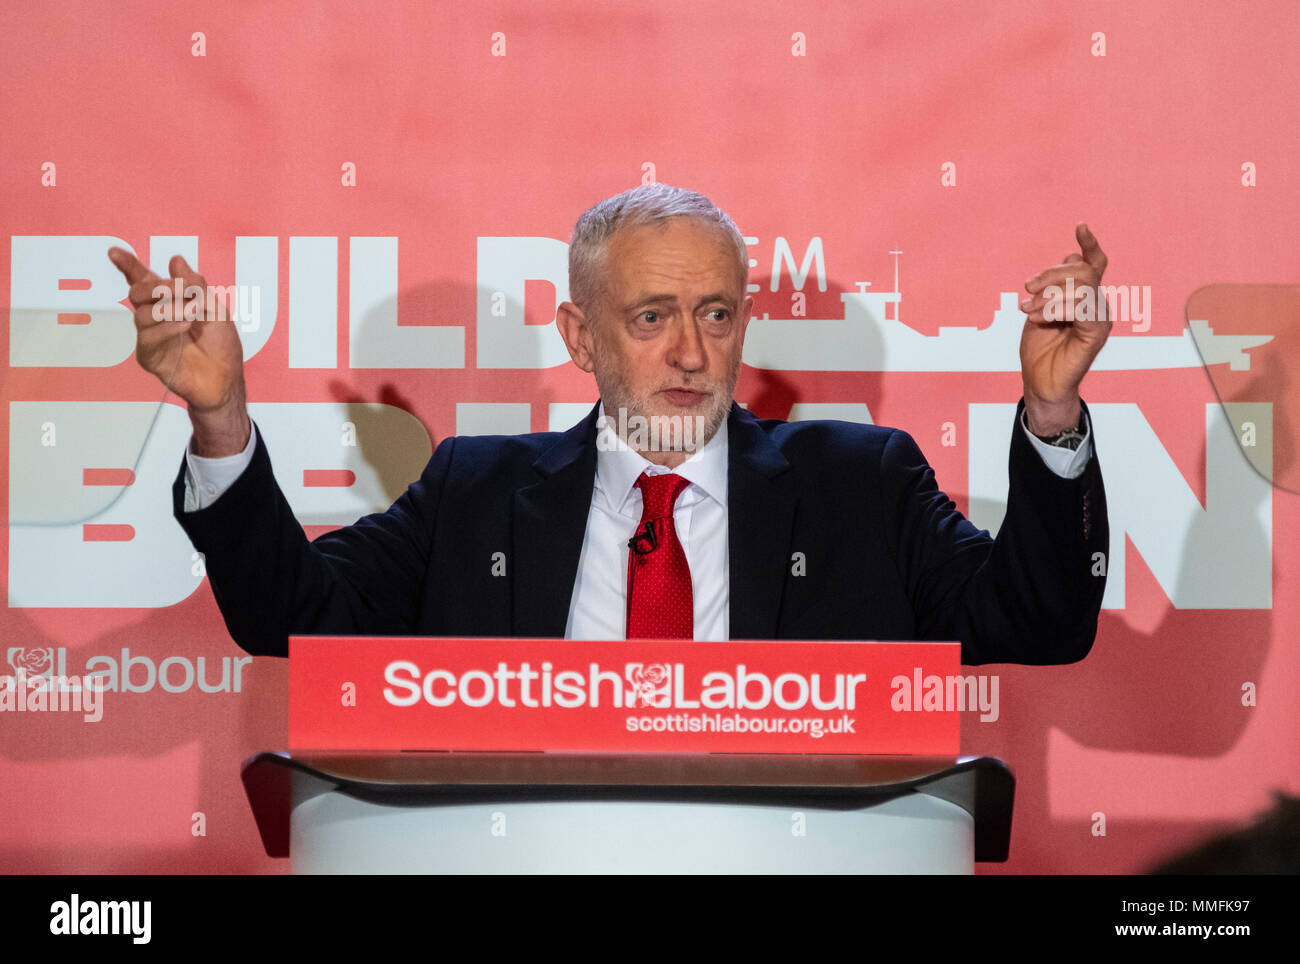 Glasgow, UK. 11 May, 2018. Labour Leader Jeremy Corbyn giving a speech in Govan, Glasgow in which he said that a Labour government will proactively support UK shipbuilding as part of a wider industrial strategy and called on the Conservative Government to guarantee three new Royal Fleet Auxiliary vessels will be built in domestic shipyards. Credit: Iain Masterton/Alamy Live News Stock Photo